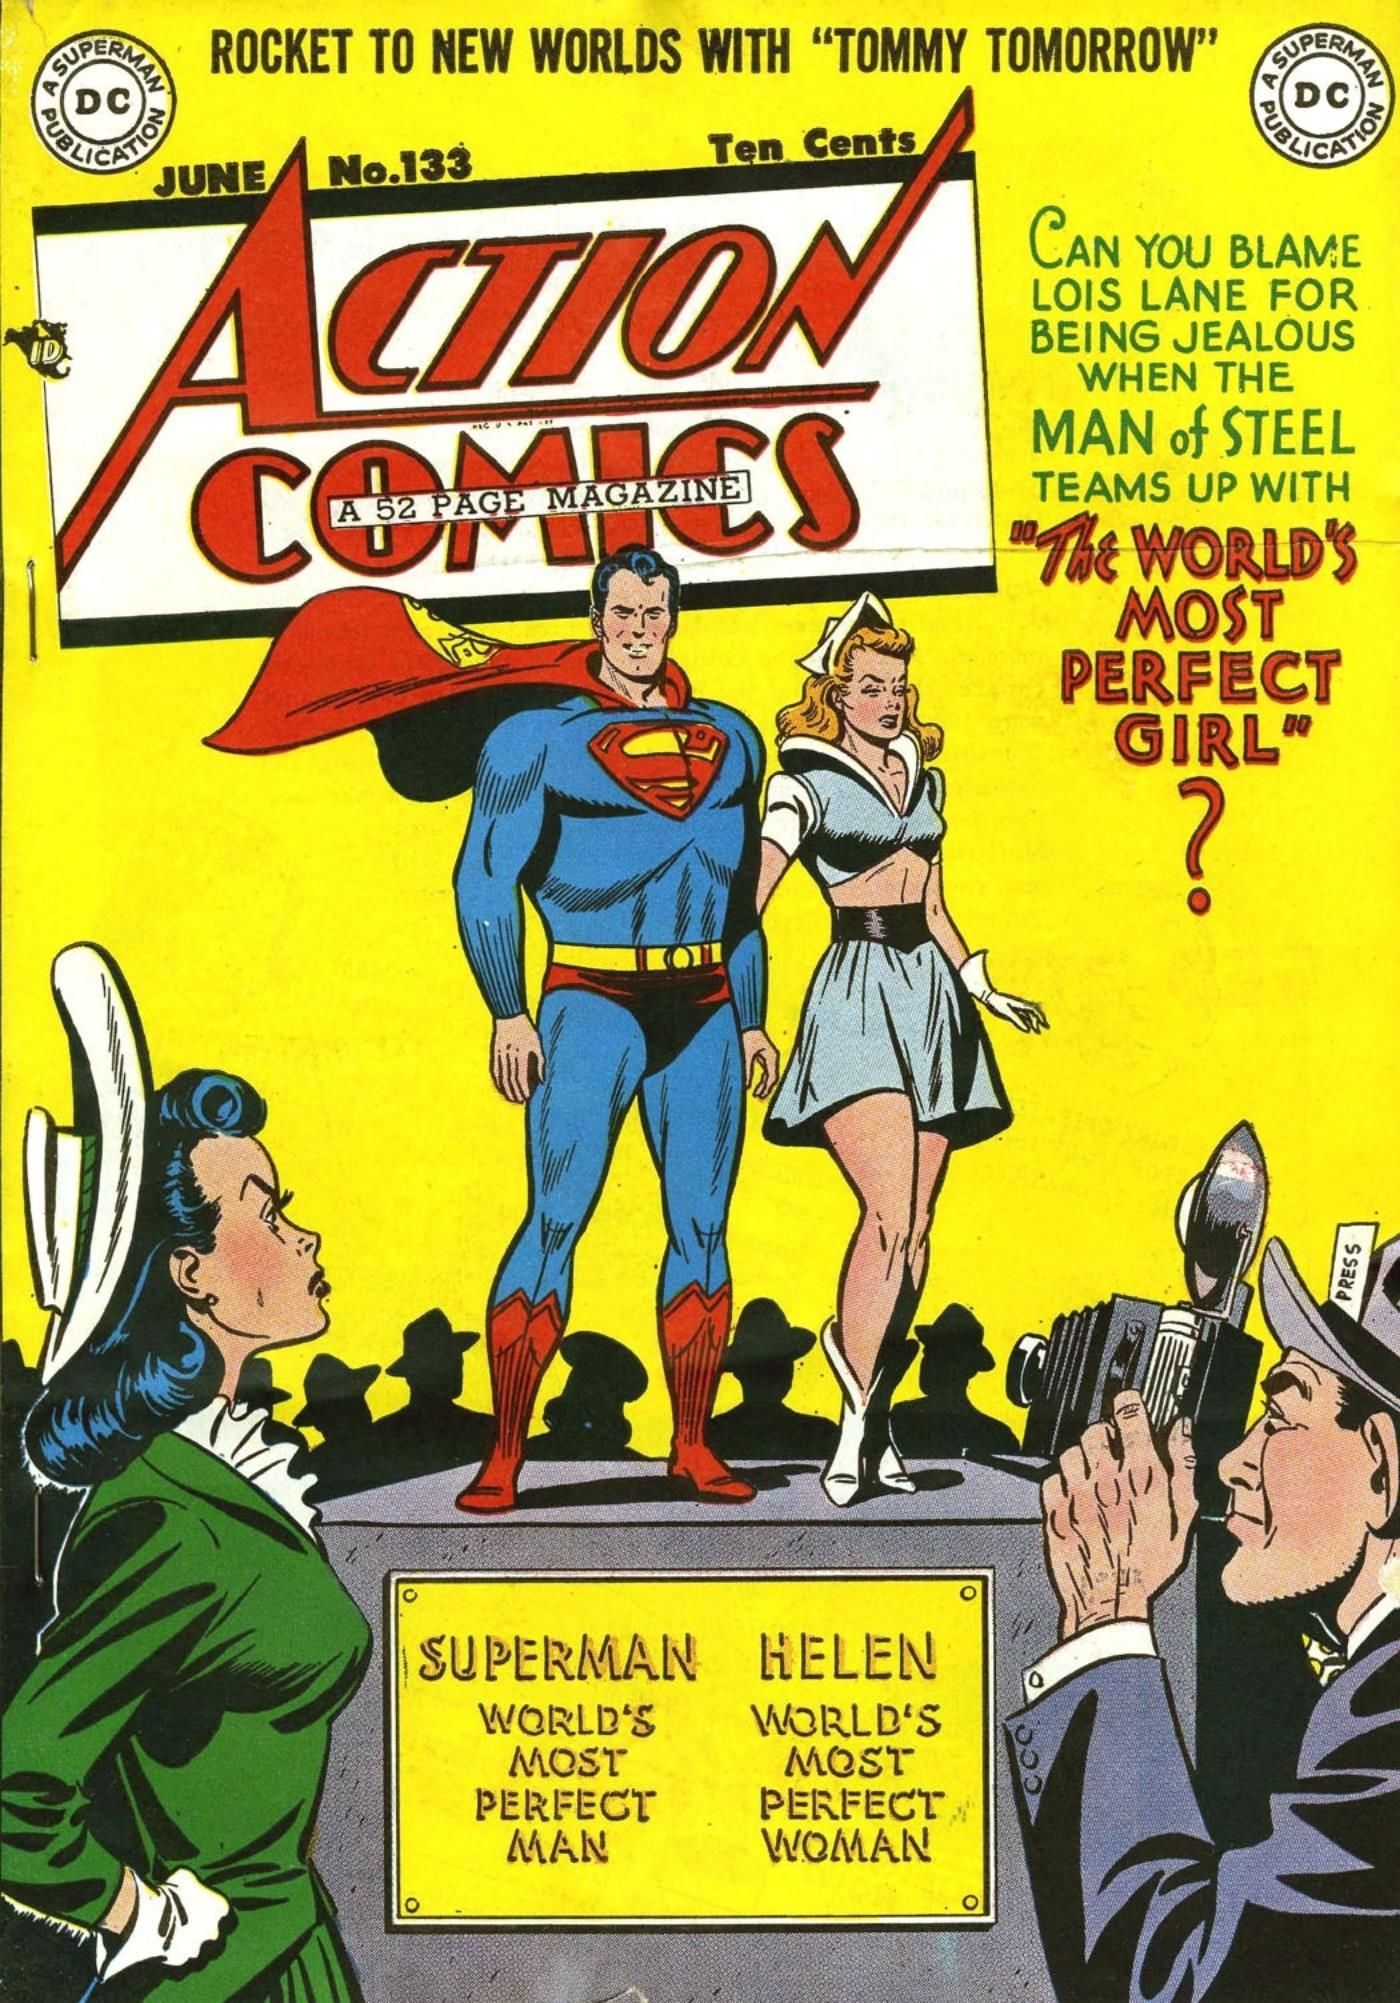 75 Years Ago, Superman Was in a Love Triangle With Lois and...Helen of Troy